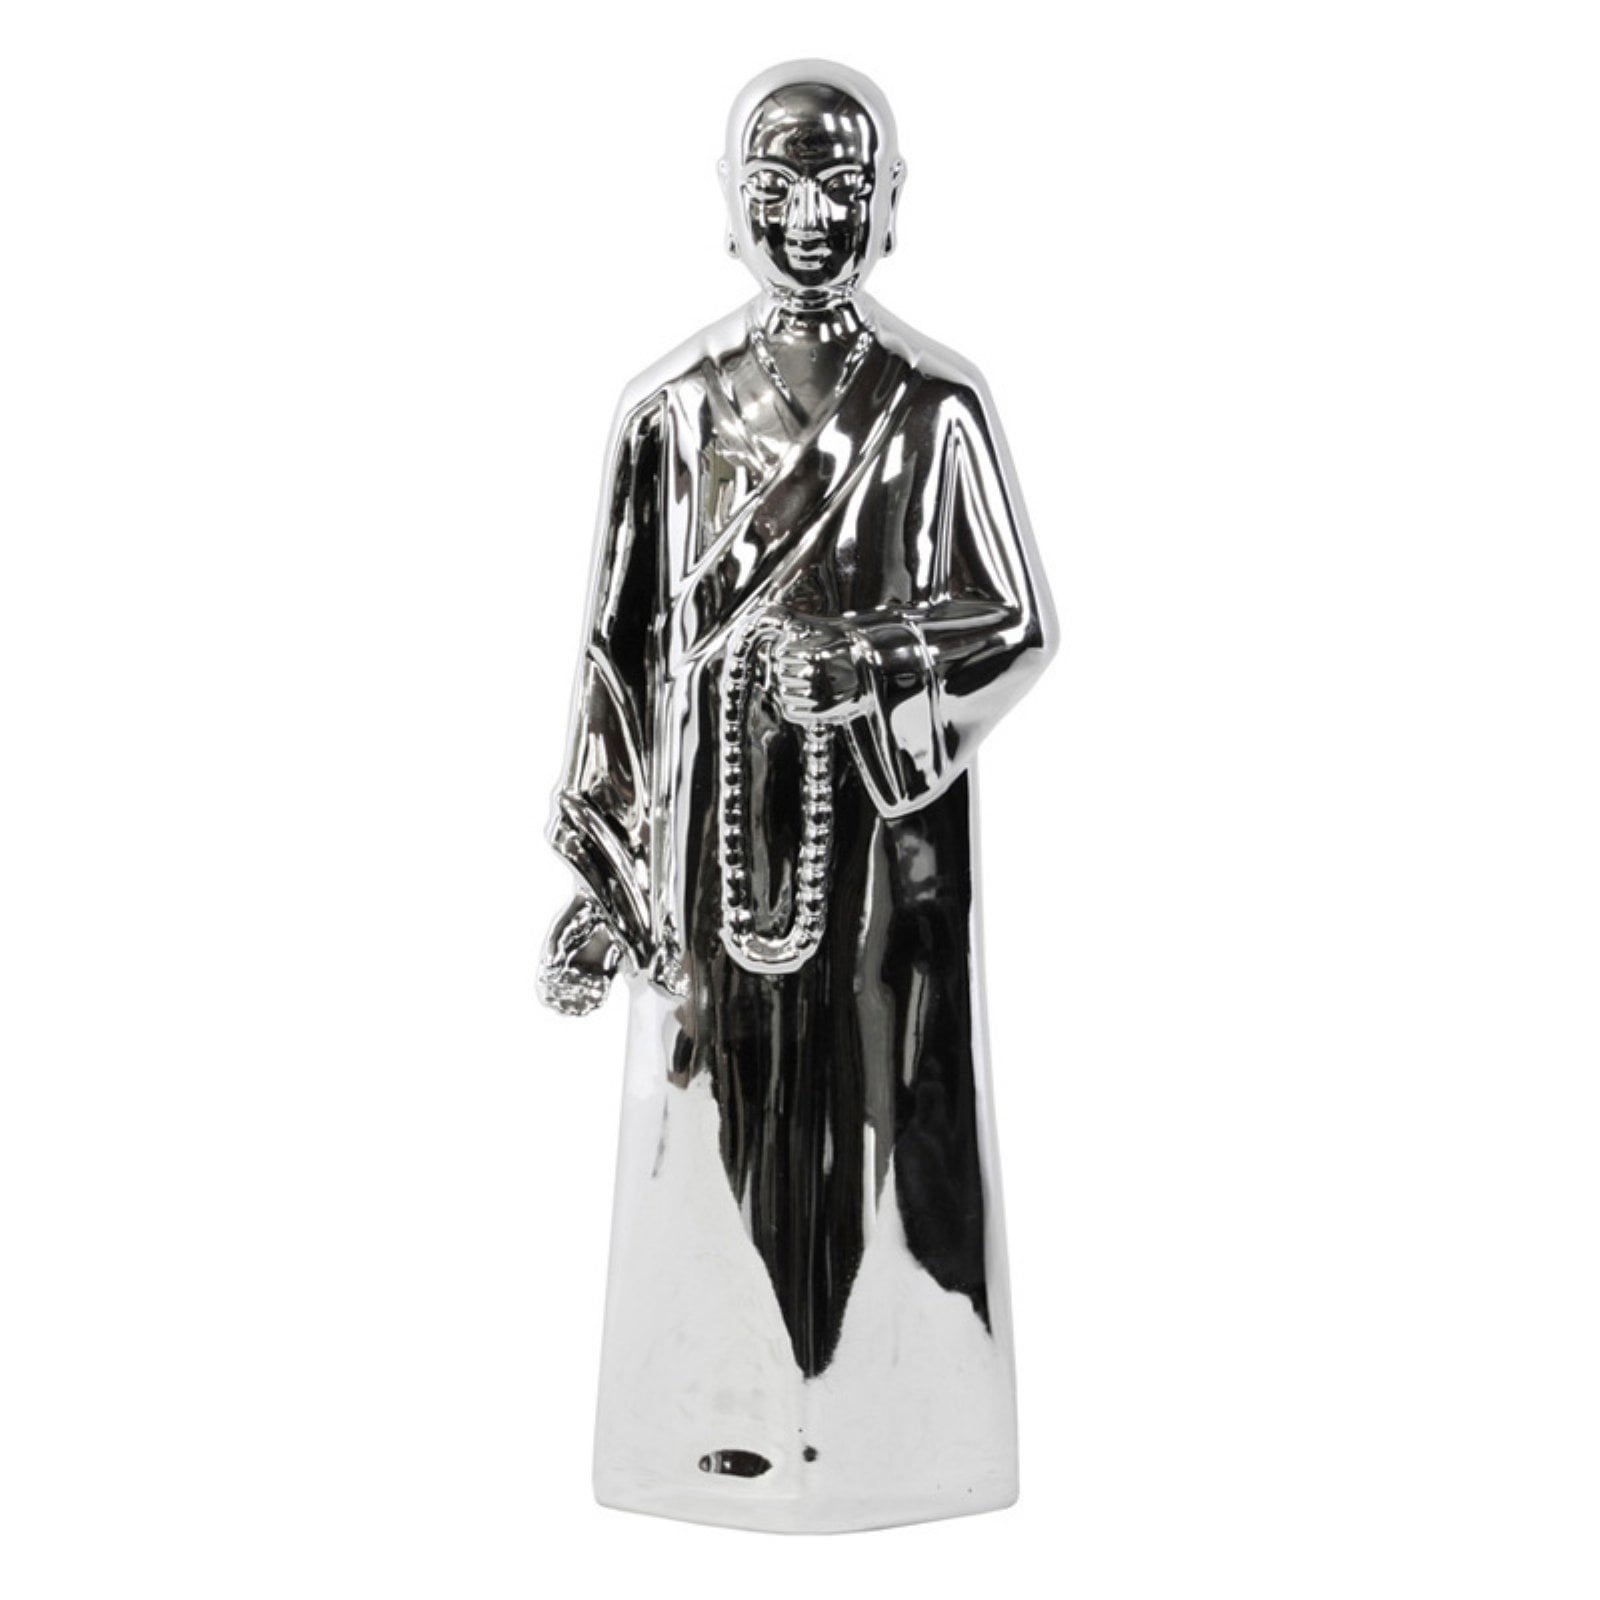 Urban Trends Porcelain Standing Monk Figurine Polished Chrome Silver